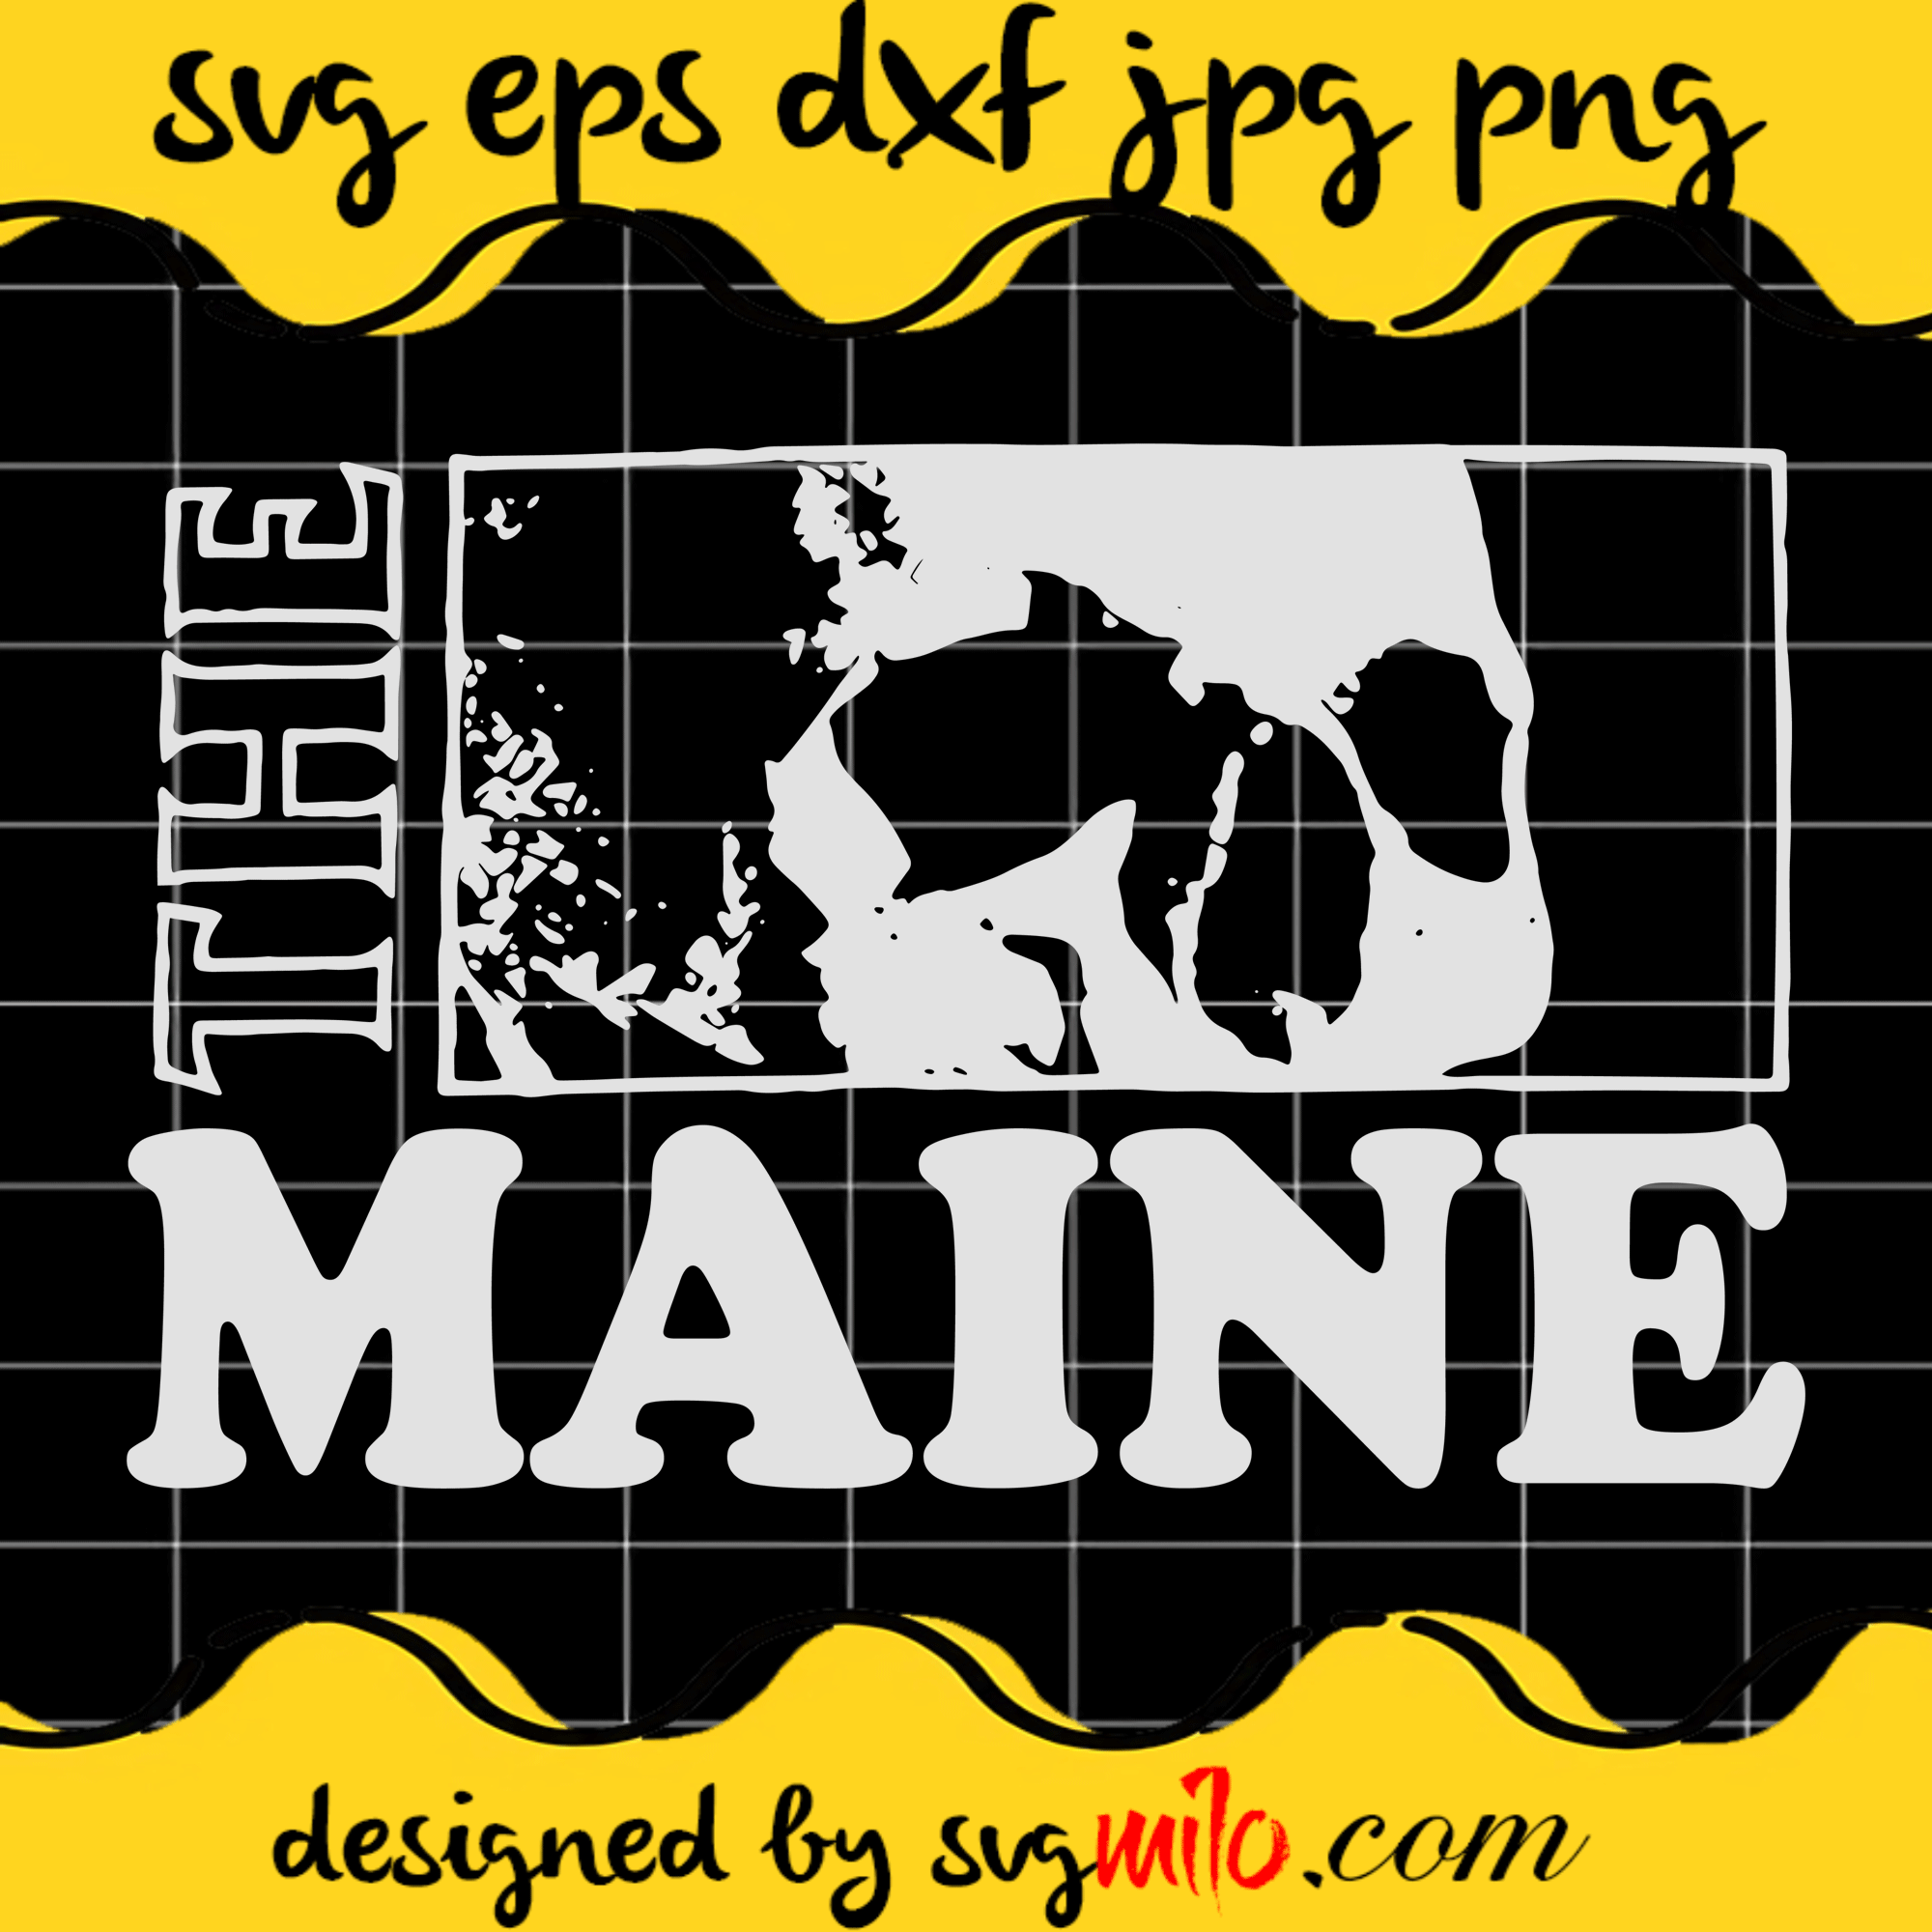 The Maine SVG, Halloween SVG, EPS, PNG, DXF, Premium Quality - SVGMILO